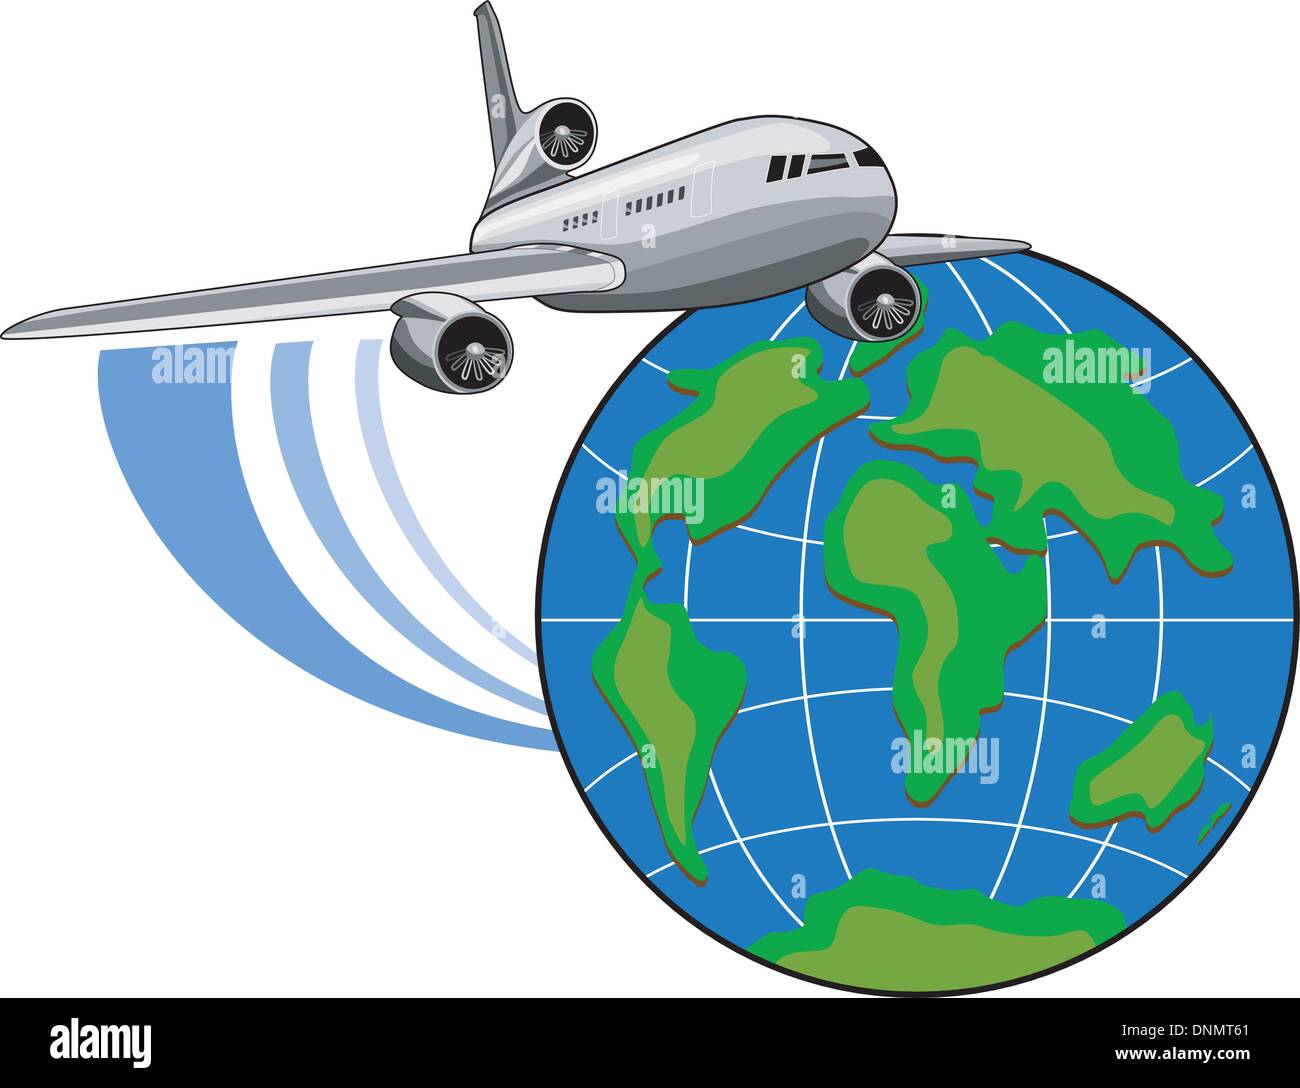 Illustration of a commercial jet plane airliner with globe world on isolated background Stock Vector